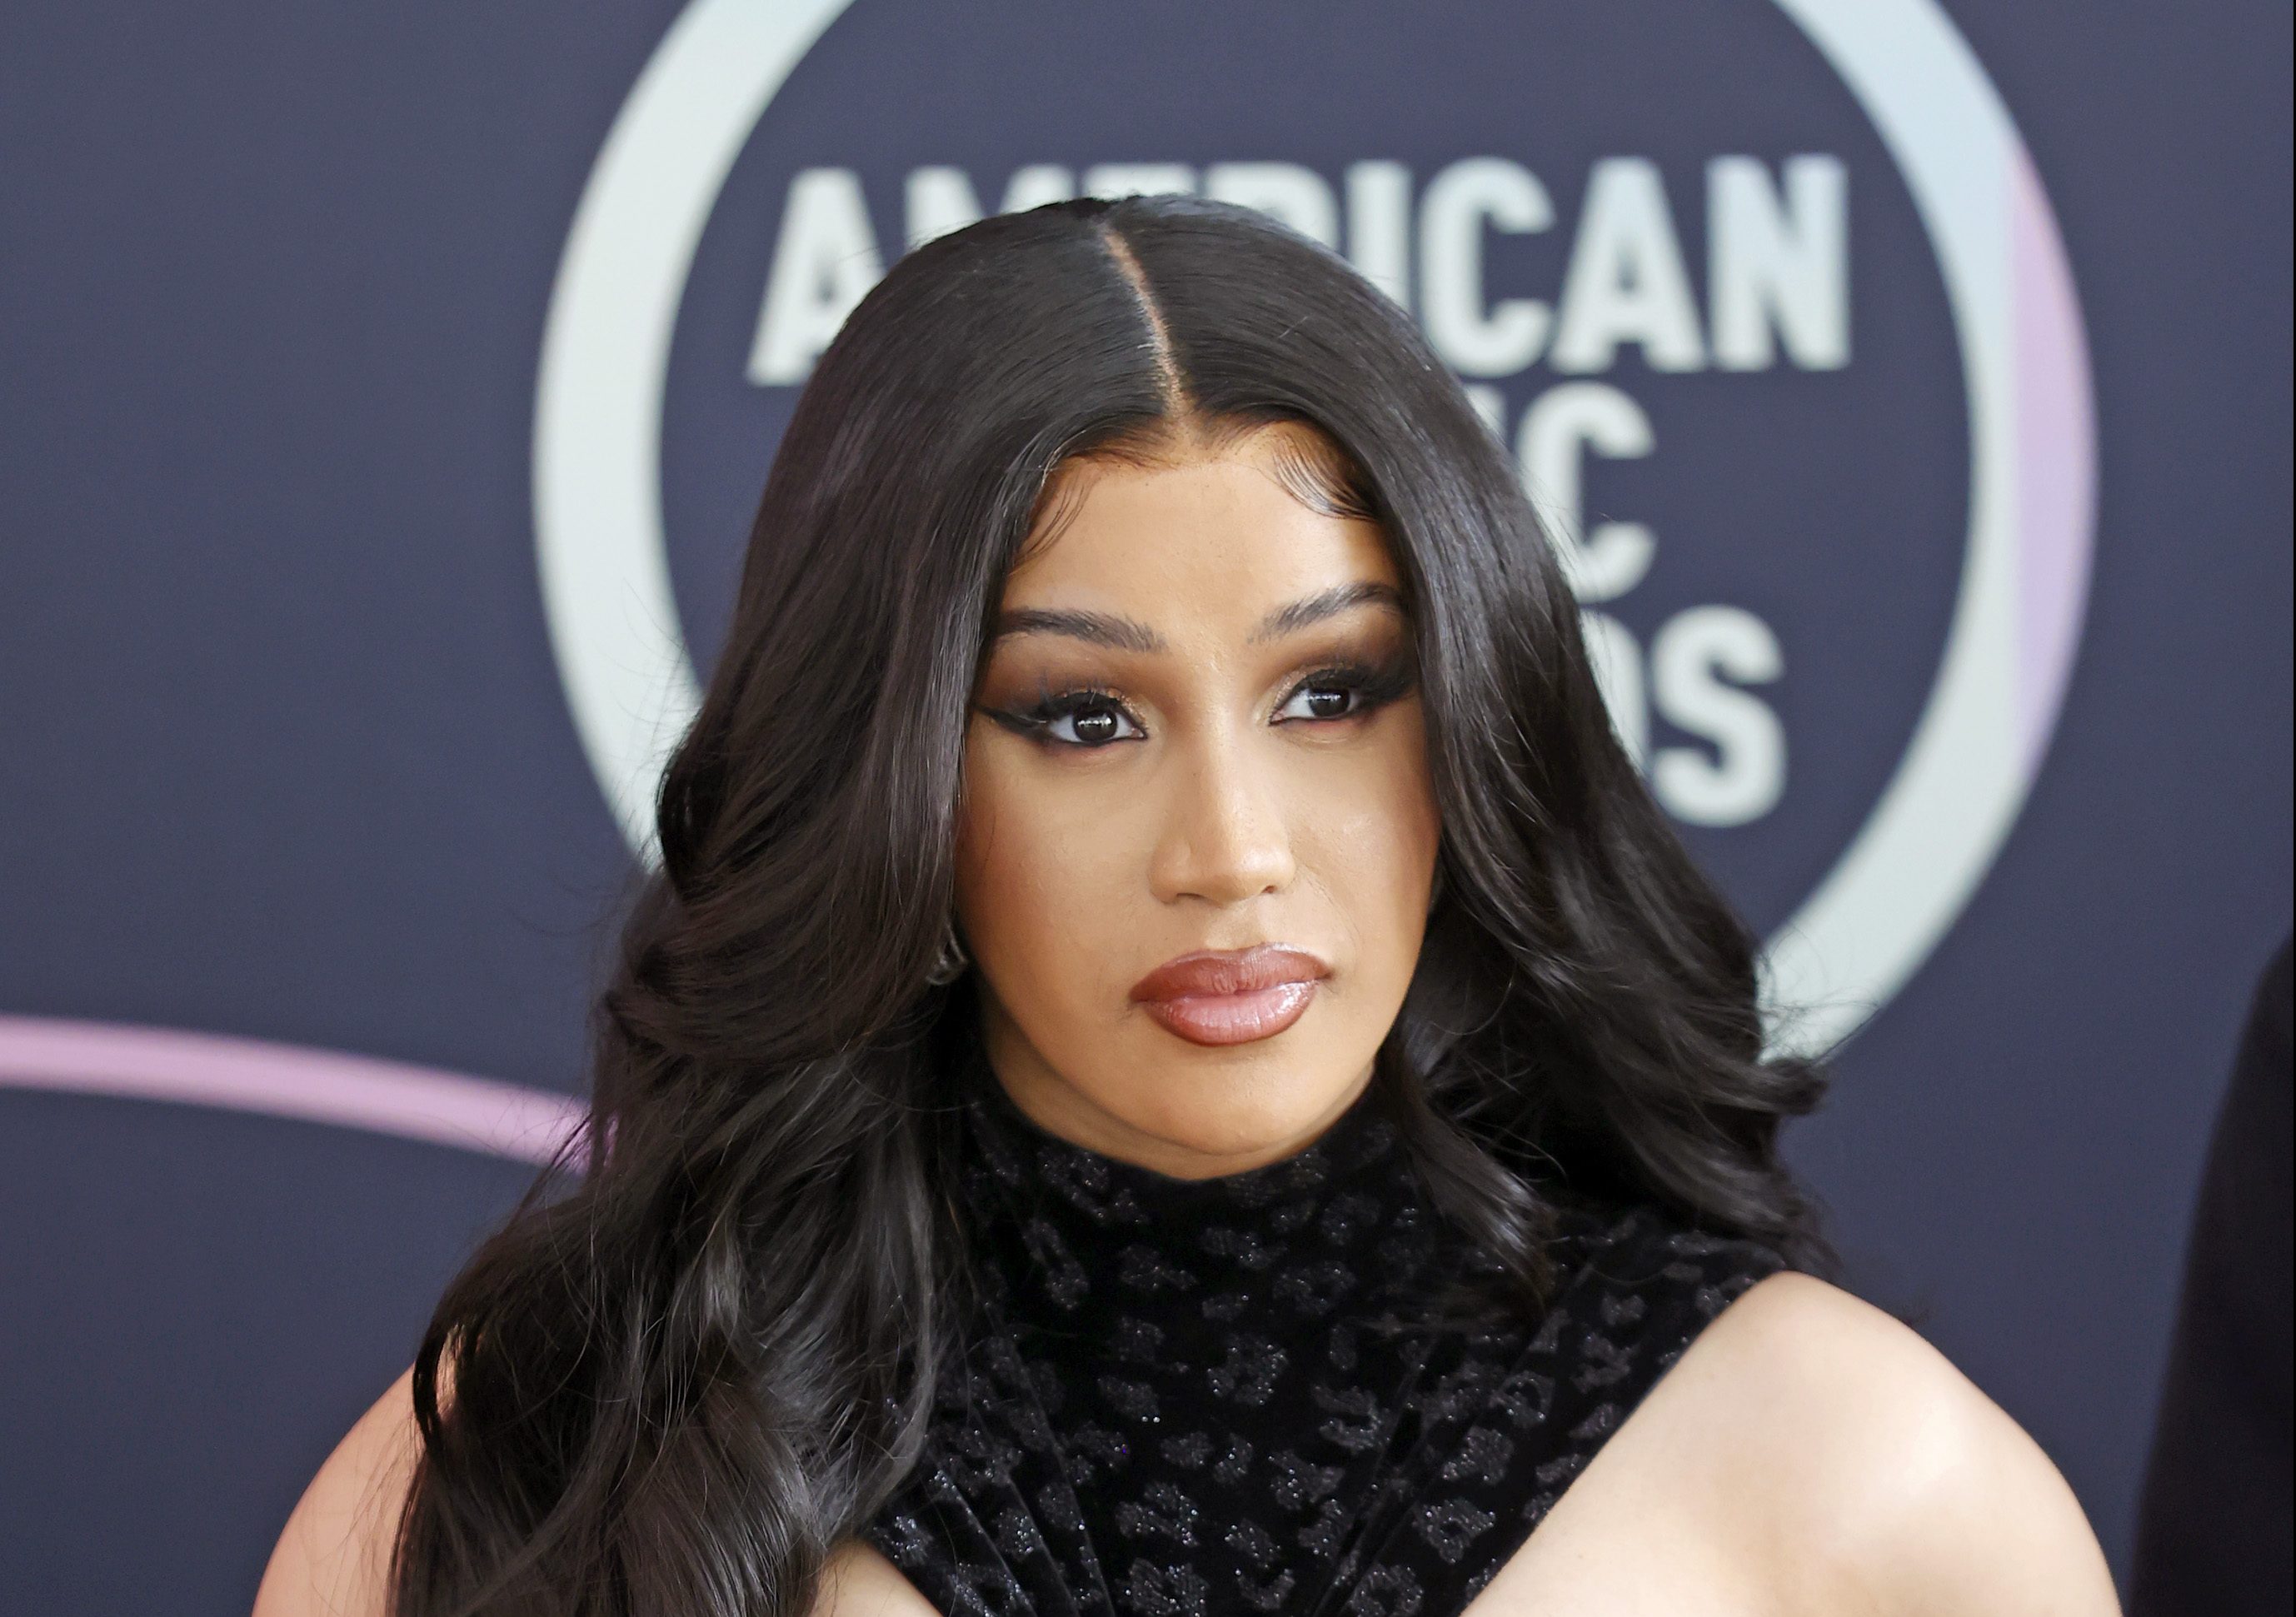 Cardi B Issues Statement After Lawsuit Win Saying "I Thought I Would Never Be Heard"